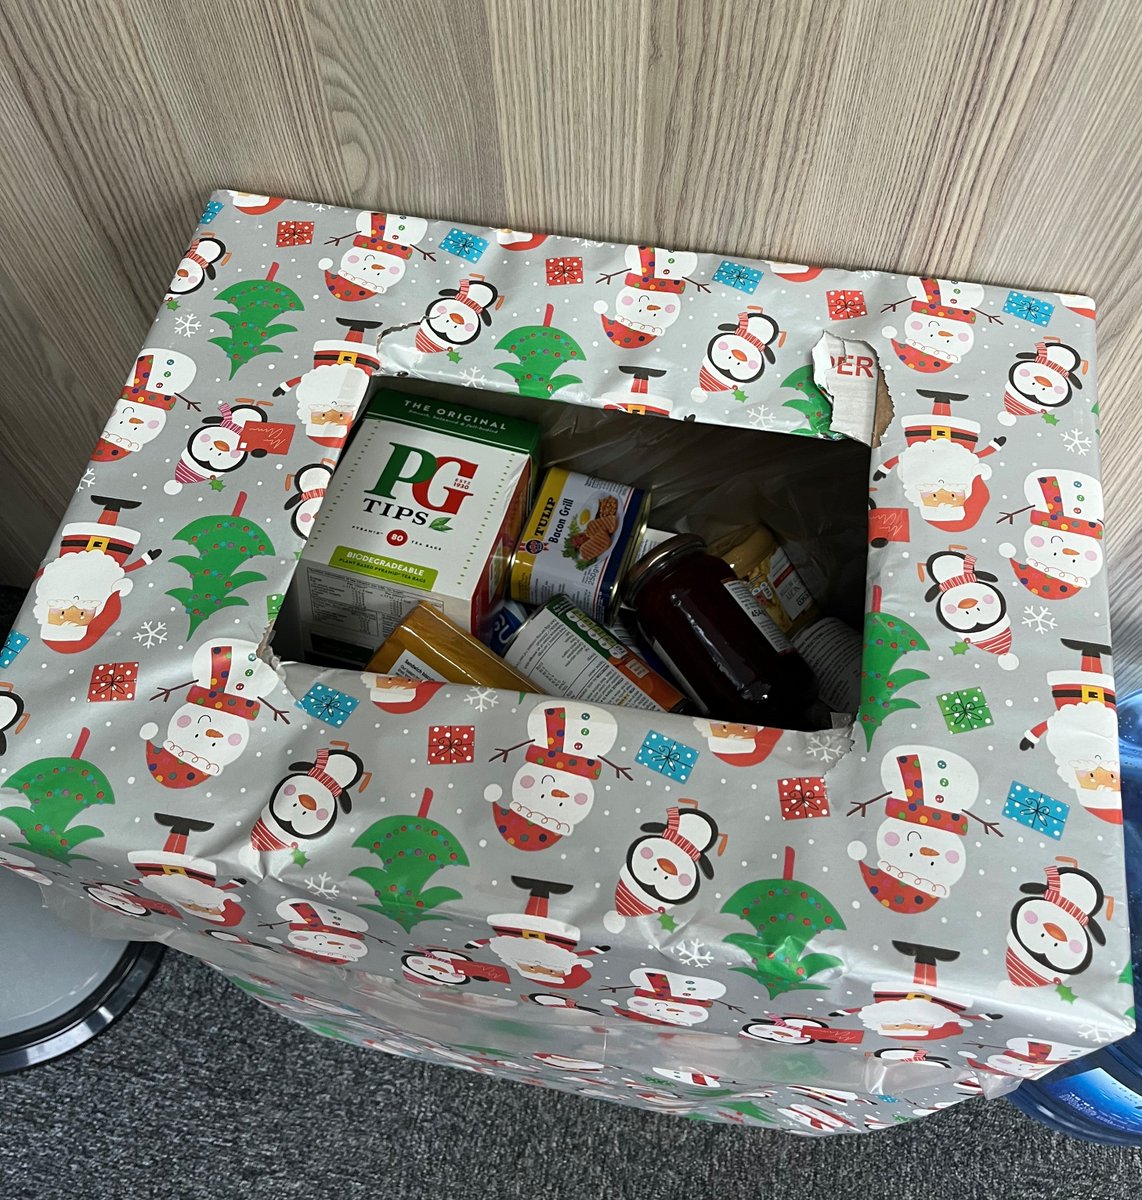 We couldn't be happier with the fantastic start that our staff have made with our #ReverseAdventCalendar for our local @TrussellTrust foodbank. With their generous donations, one large box has already been filled and we're well on our way to filling our 2nd! #ByYourSide